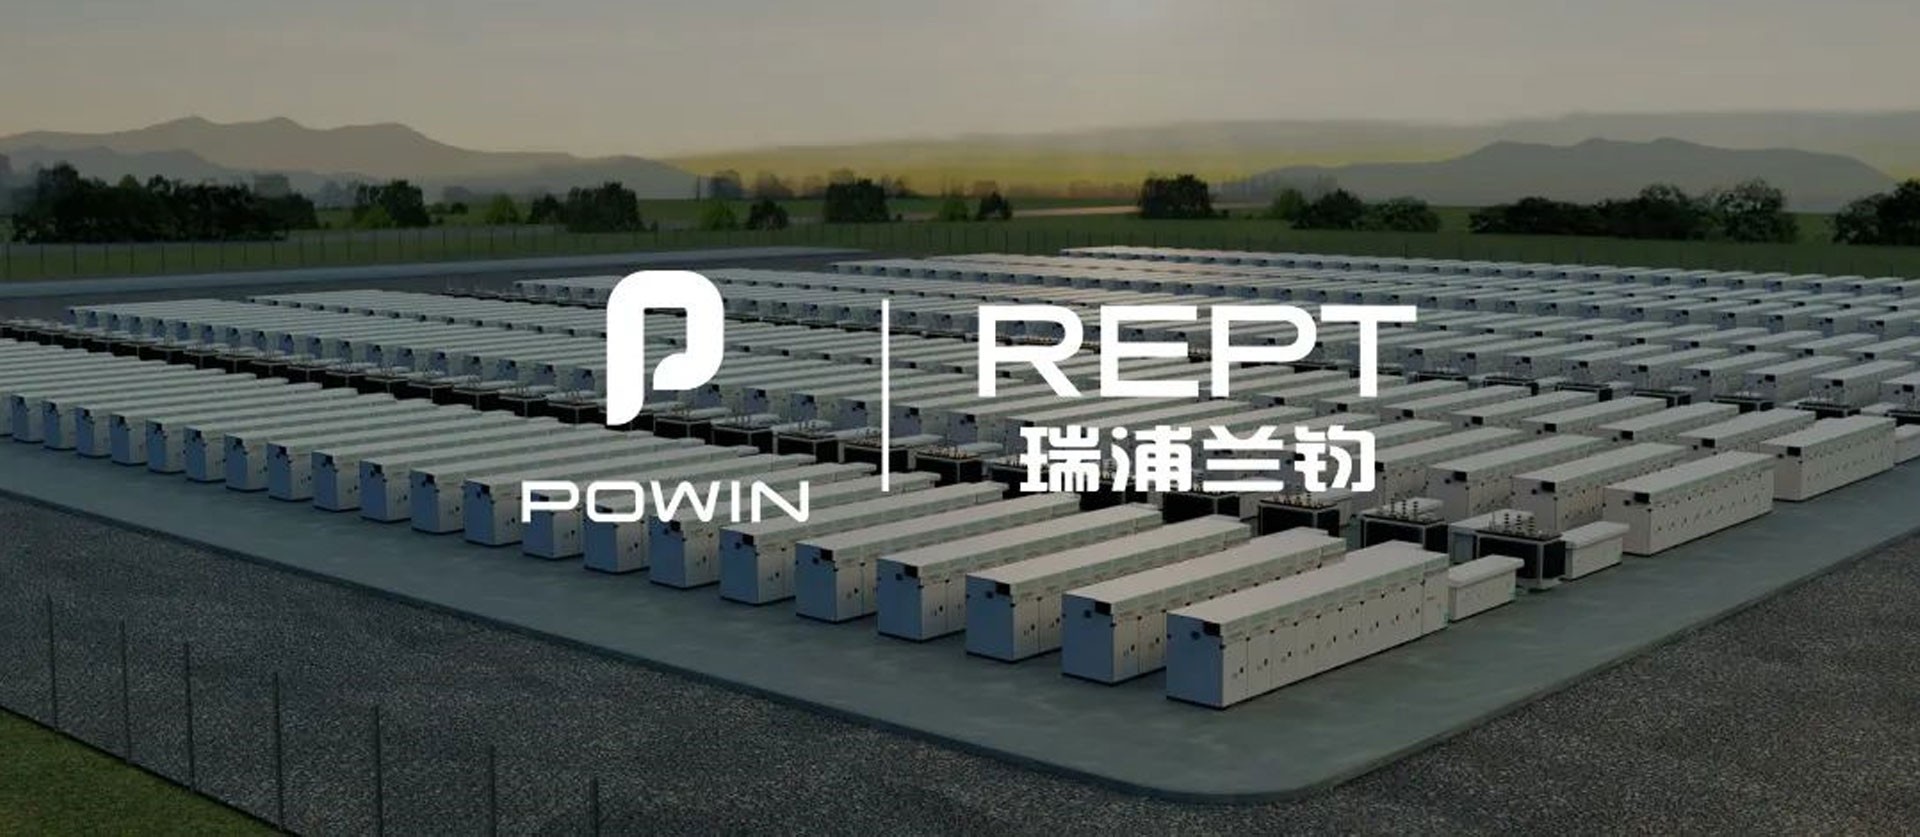 overweight north america | rept battero and powin reached a 3gwh strategic cooperation agreement!